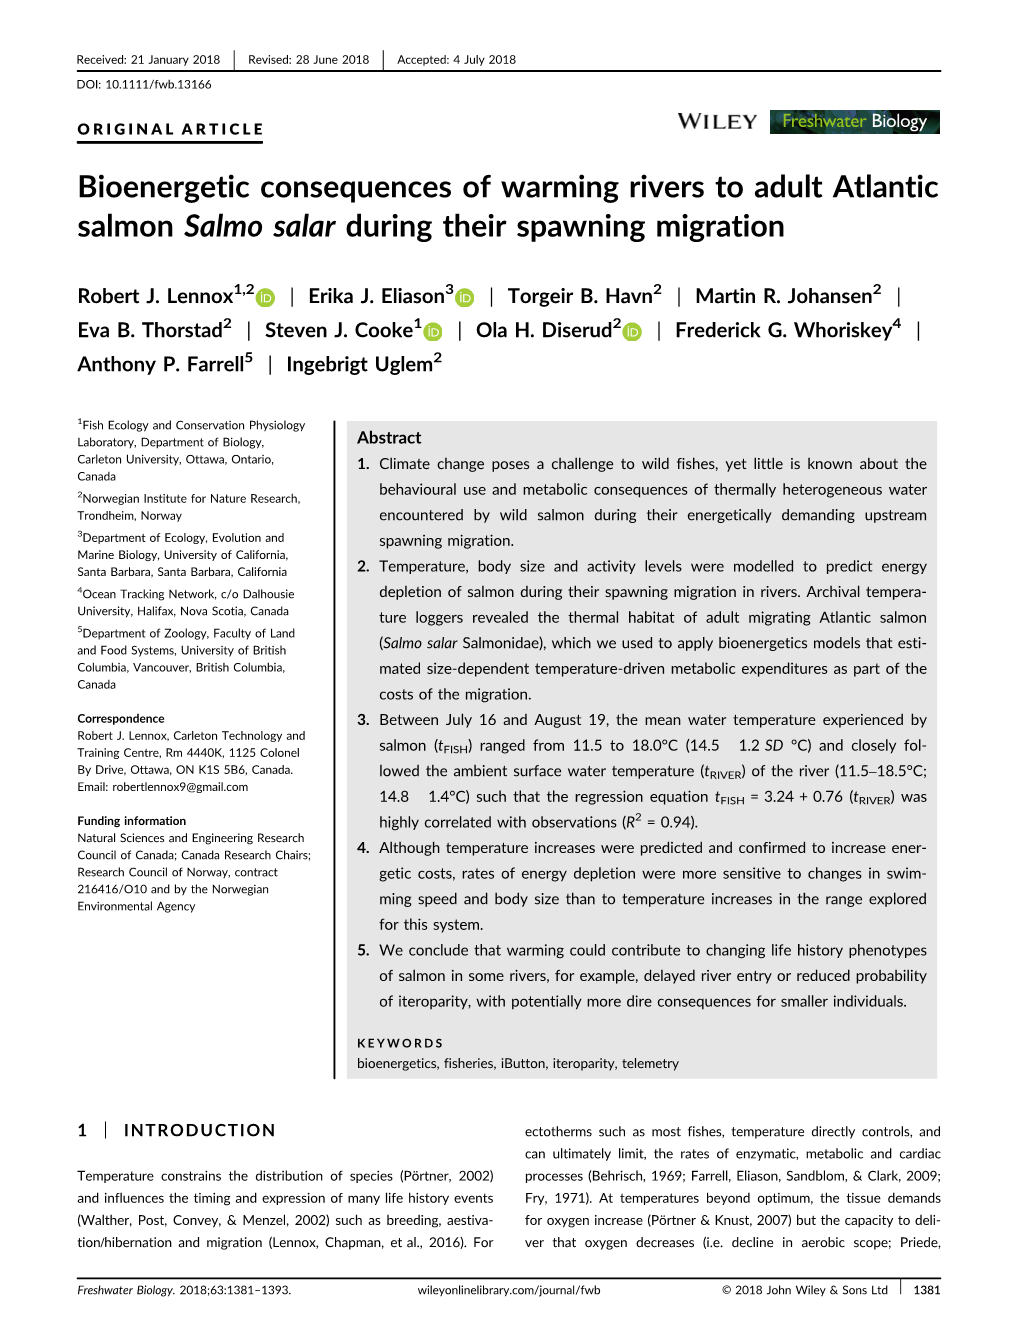 Bioenergetic Consequences of Warming Rivers to Adult Atlantic Salmon Salmo Salar During Their Spawning Migration